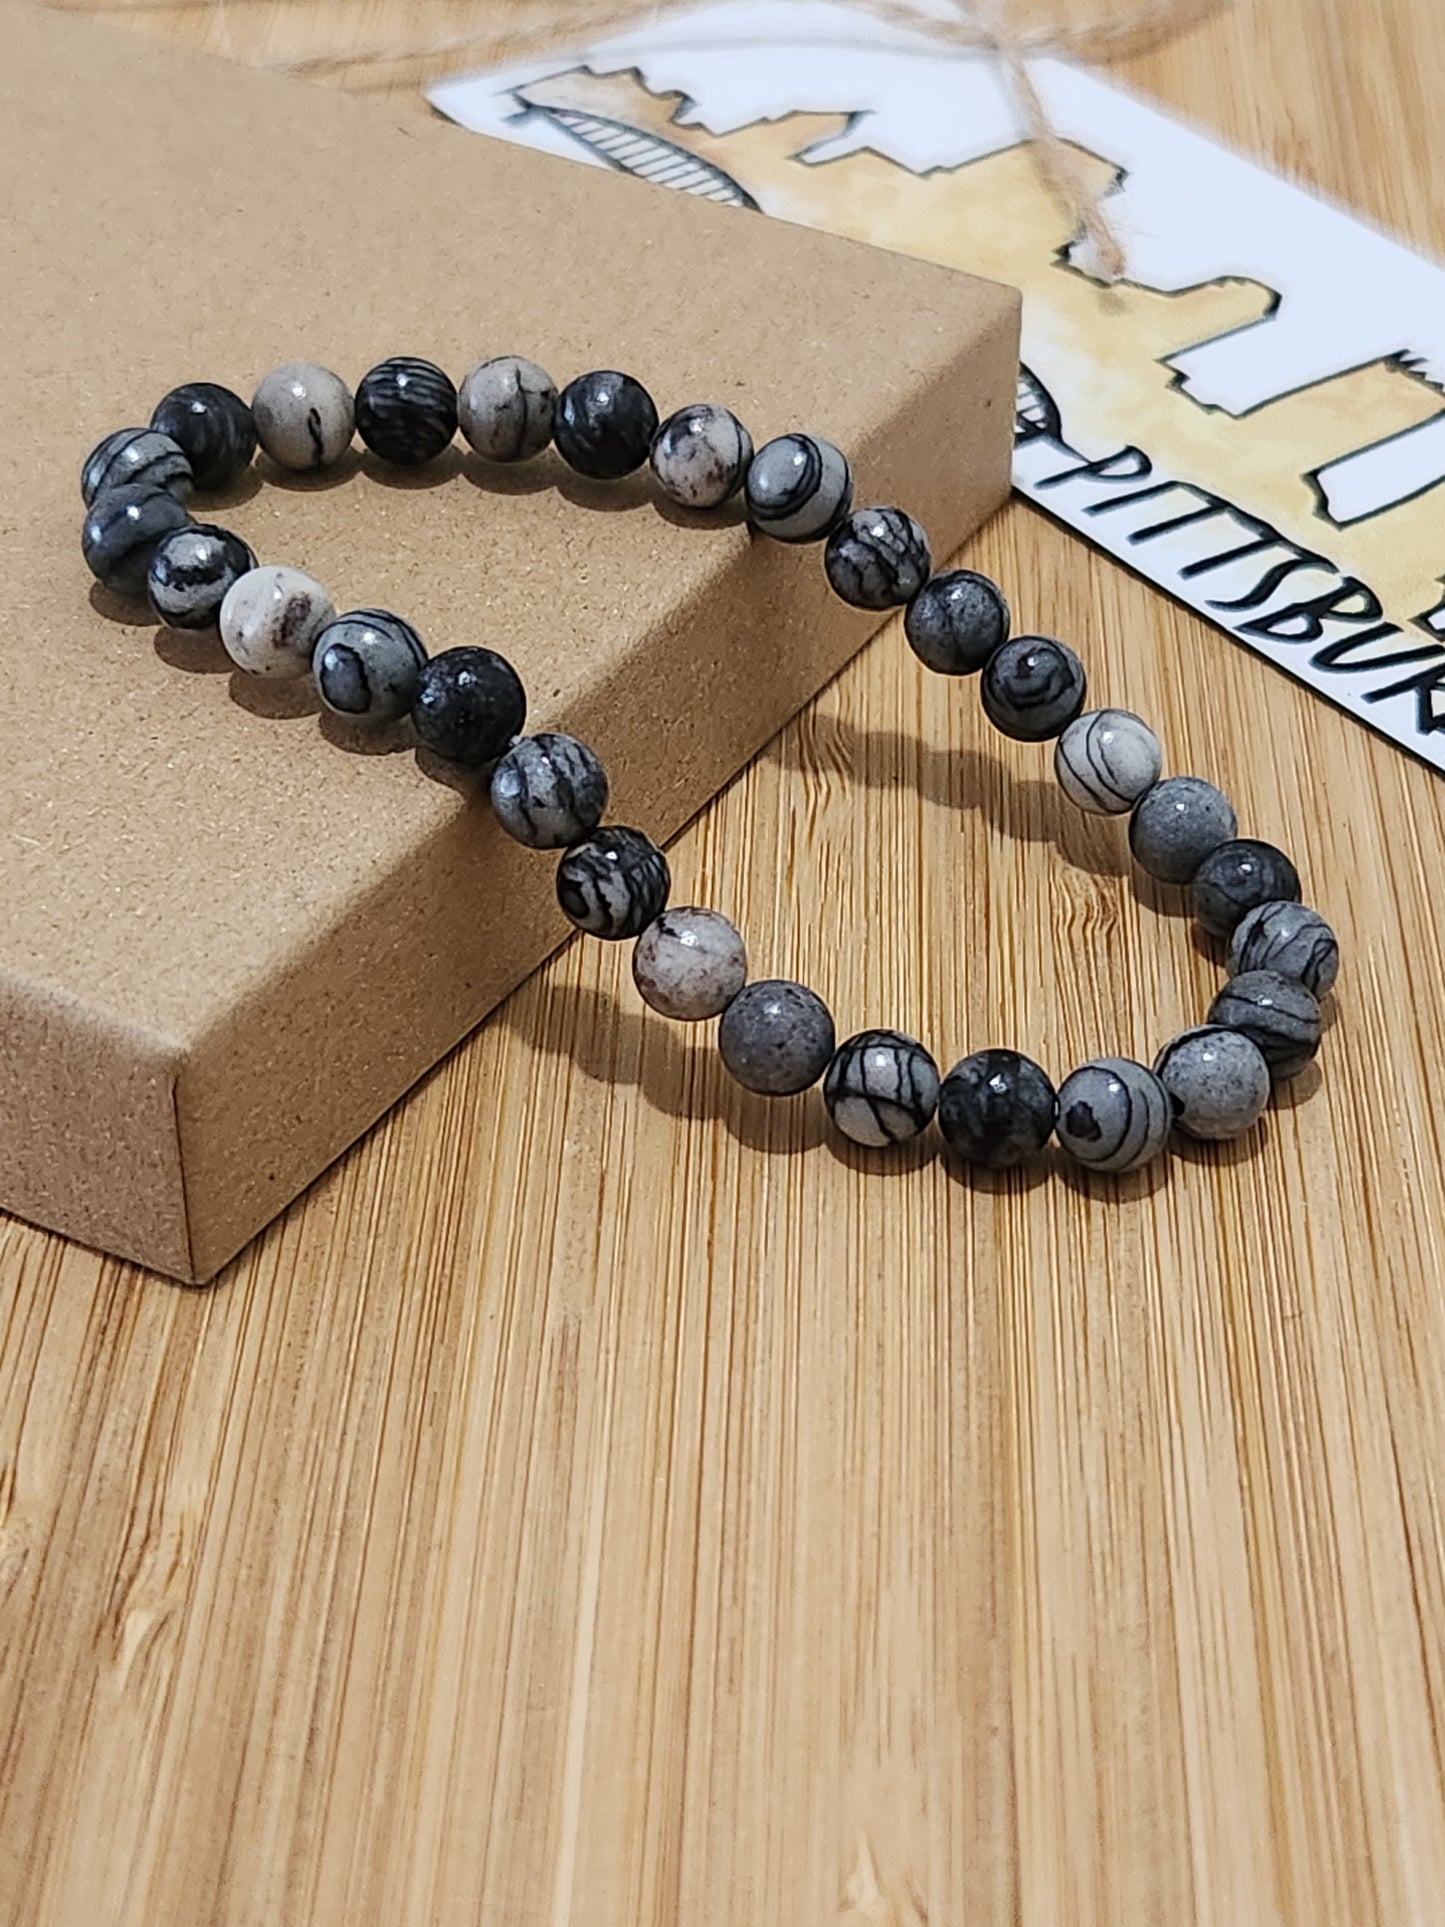 Spider Web Jasper Stone Beaded bracelet - 6mm stones - kindness - wholeness - compassion - connections